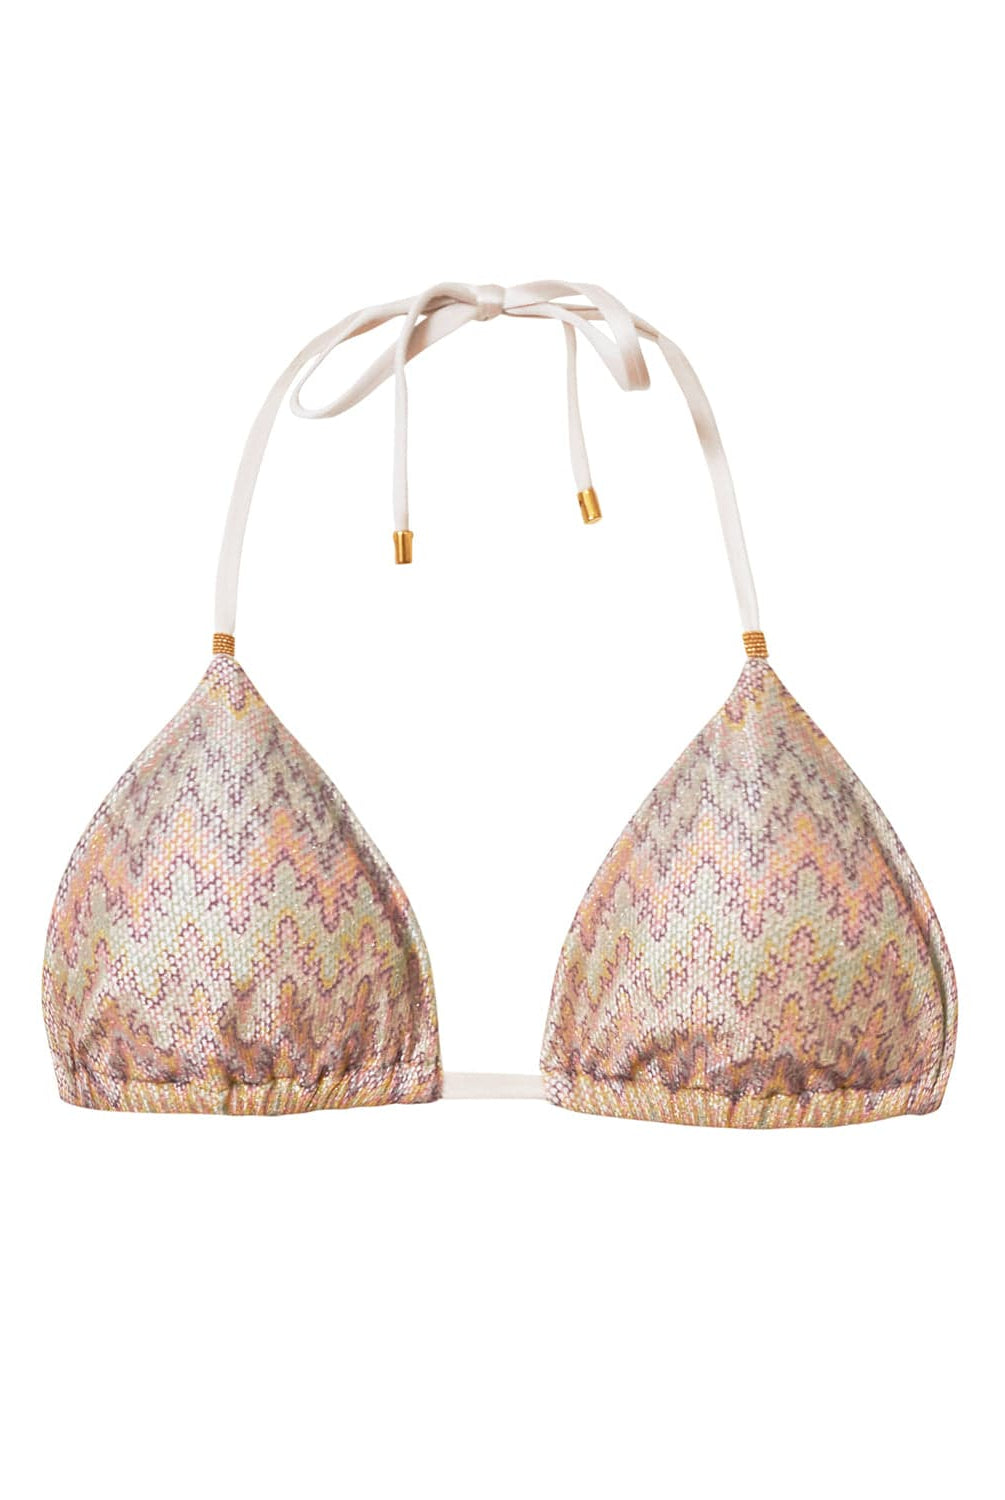 A multi-colored print triangle bikini top with gold details. Featured against a white wall background.